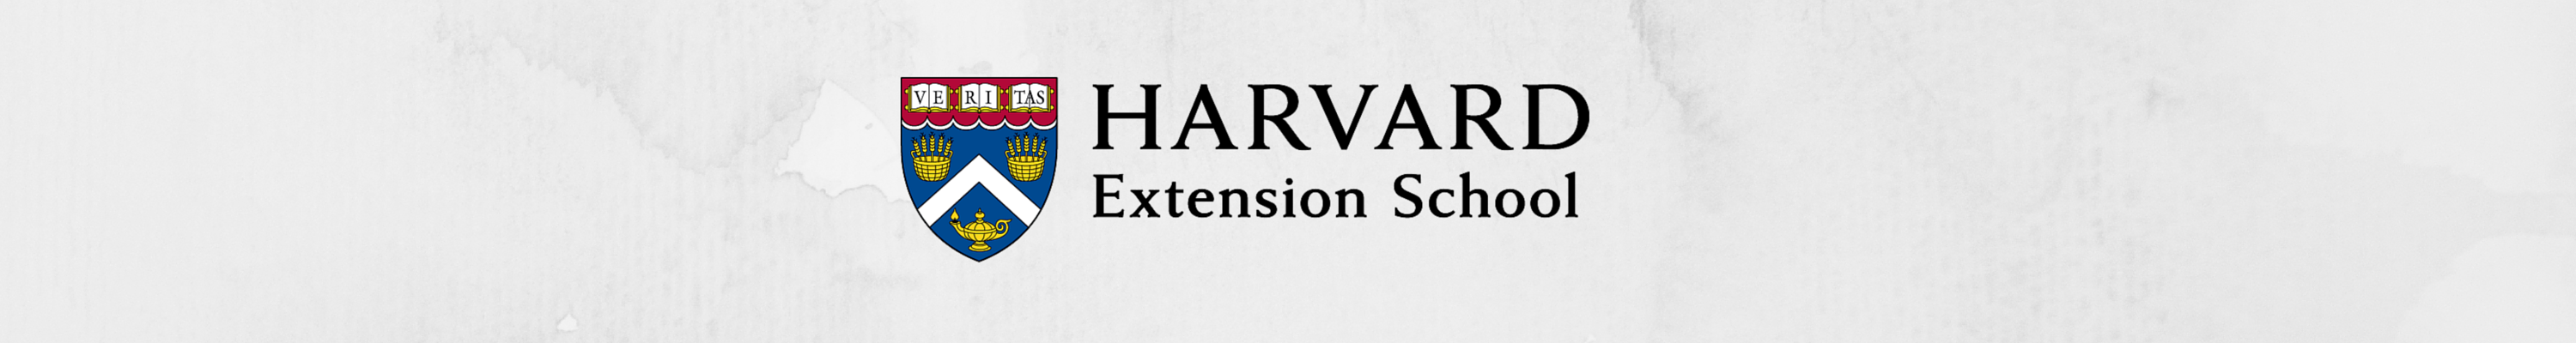 Marquee image: Harvard Extension School shield on decorative paper